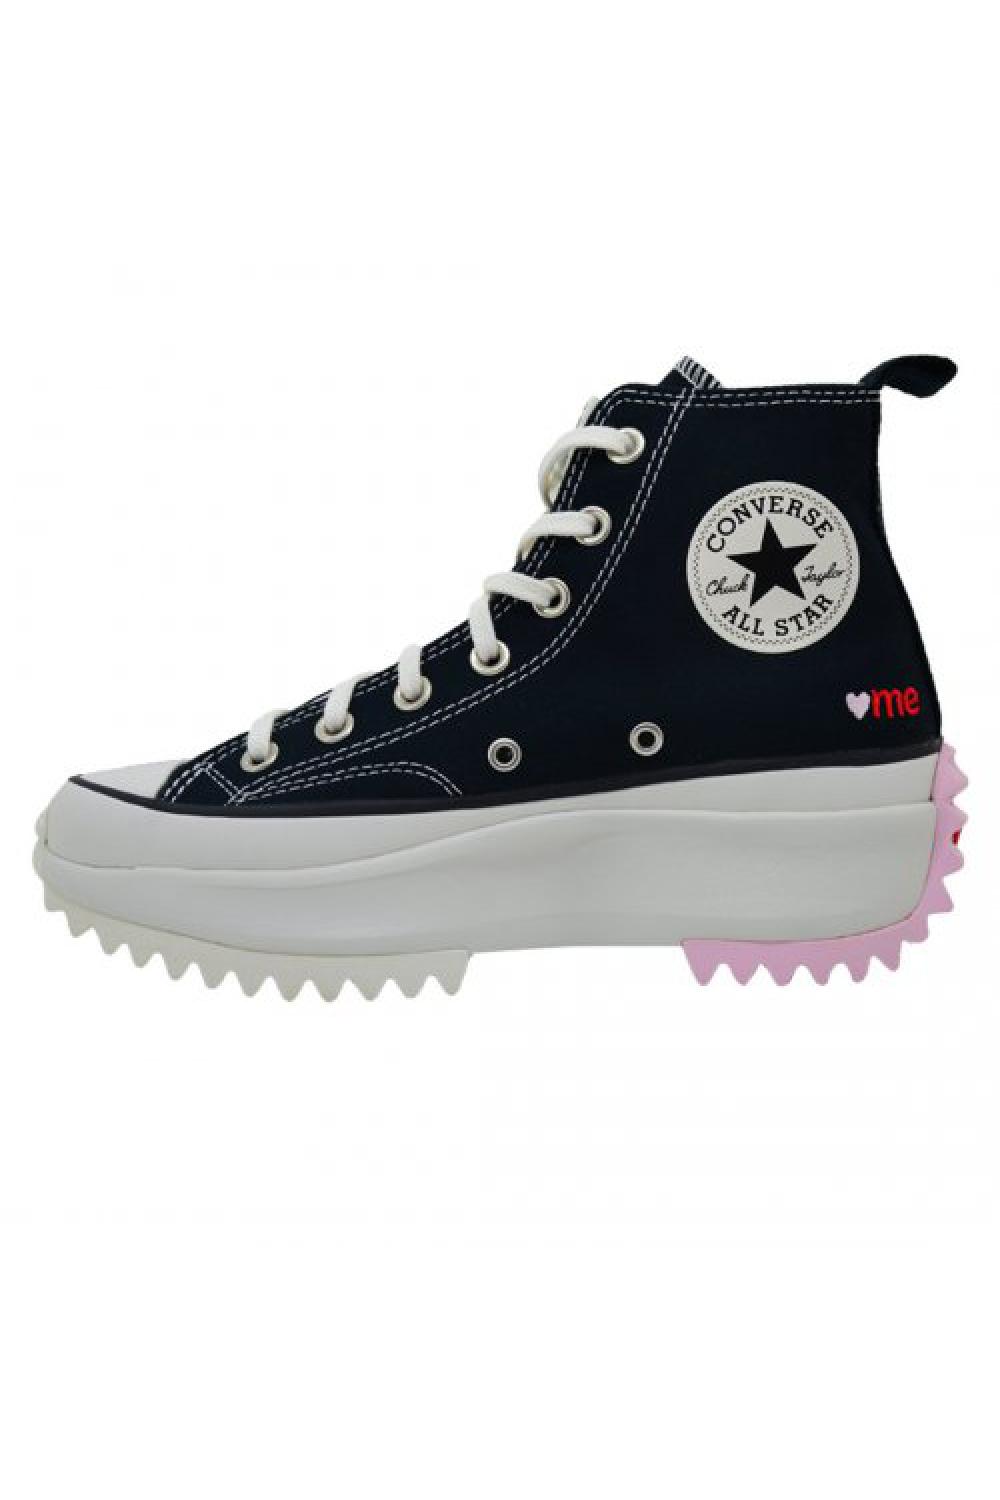 ALL STAR CONVERSE Sneaker Run Star Hike Valentines With Love - Black - White (A01598C)